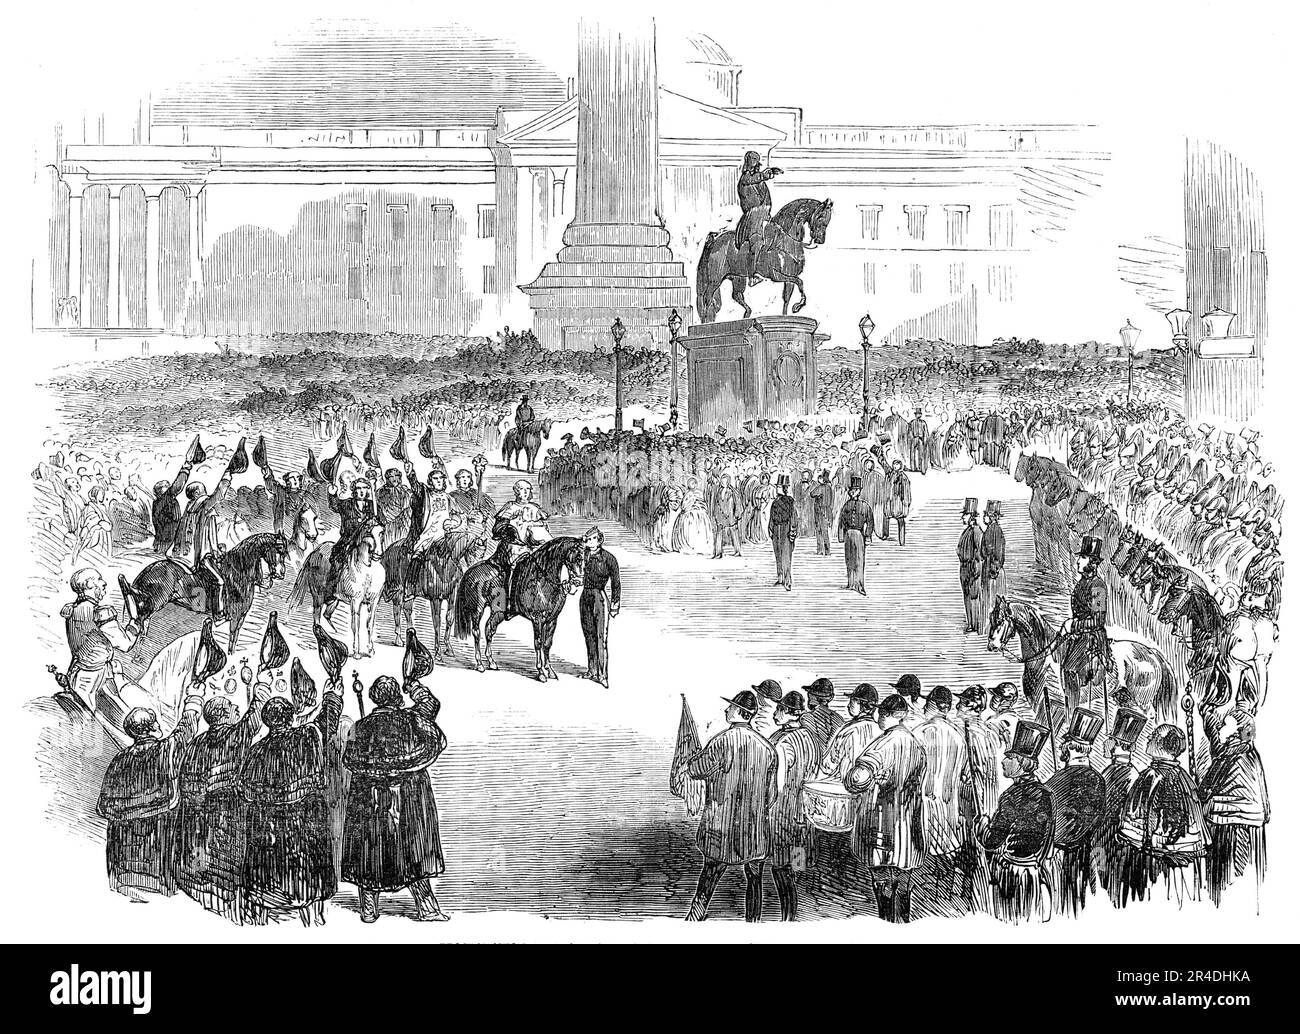 Proclamation of Peace at Trafalgar-Square, 1856. Crowds in London at an official ceremony to mark the end of the Crimean War. Taking part in the procession were numerous dignitaries and officials including: '...Life Guards, the Beadles of Westminster, the High Constable, the High Bailiff and Deputy-Steward of Westminster; Knight Marshal's men...drums. Drum-Major, trumpets, and Sergeant Trumpeter...The Trafalgar-square district was occupied by one of those dense moving masses which seem only possible on the supposition that an entire capital has turned itself out of doors'. In the background ar Stock Photo